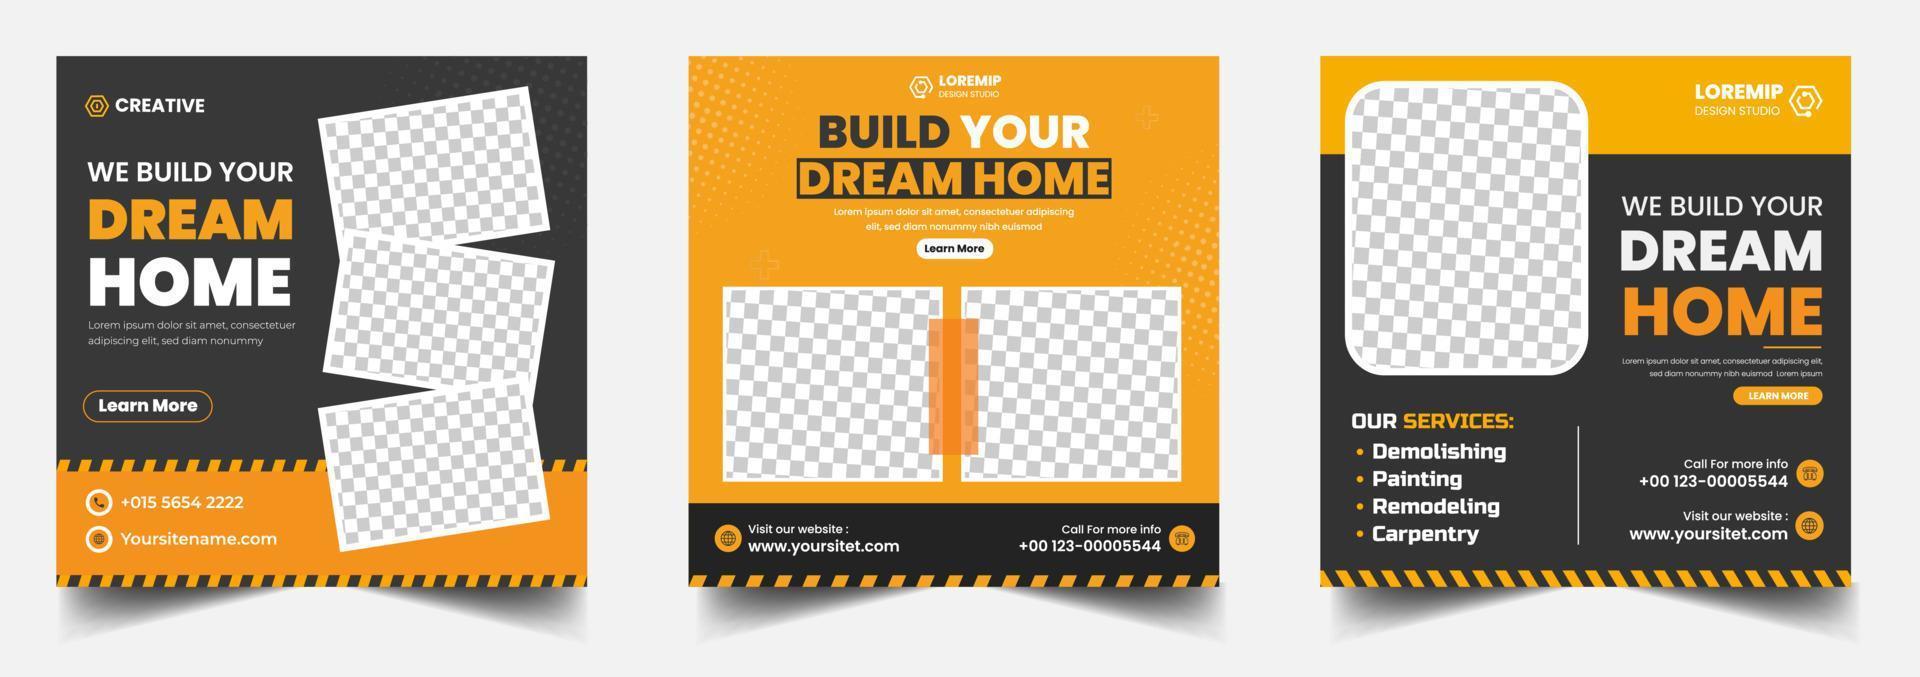 Construction social media post banner design Template with yellow color, Corporate construction tools social media post design, home improvement banner template, home repair social media post banner. vector